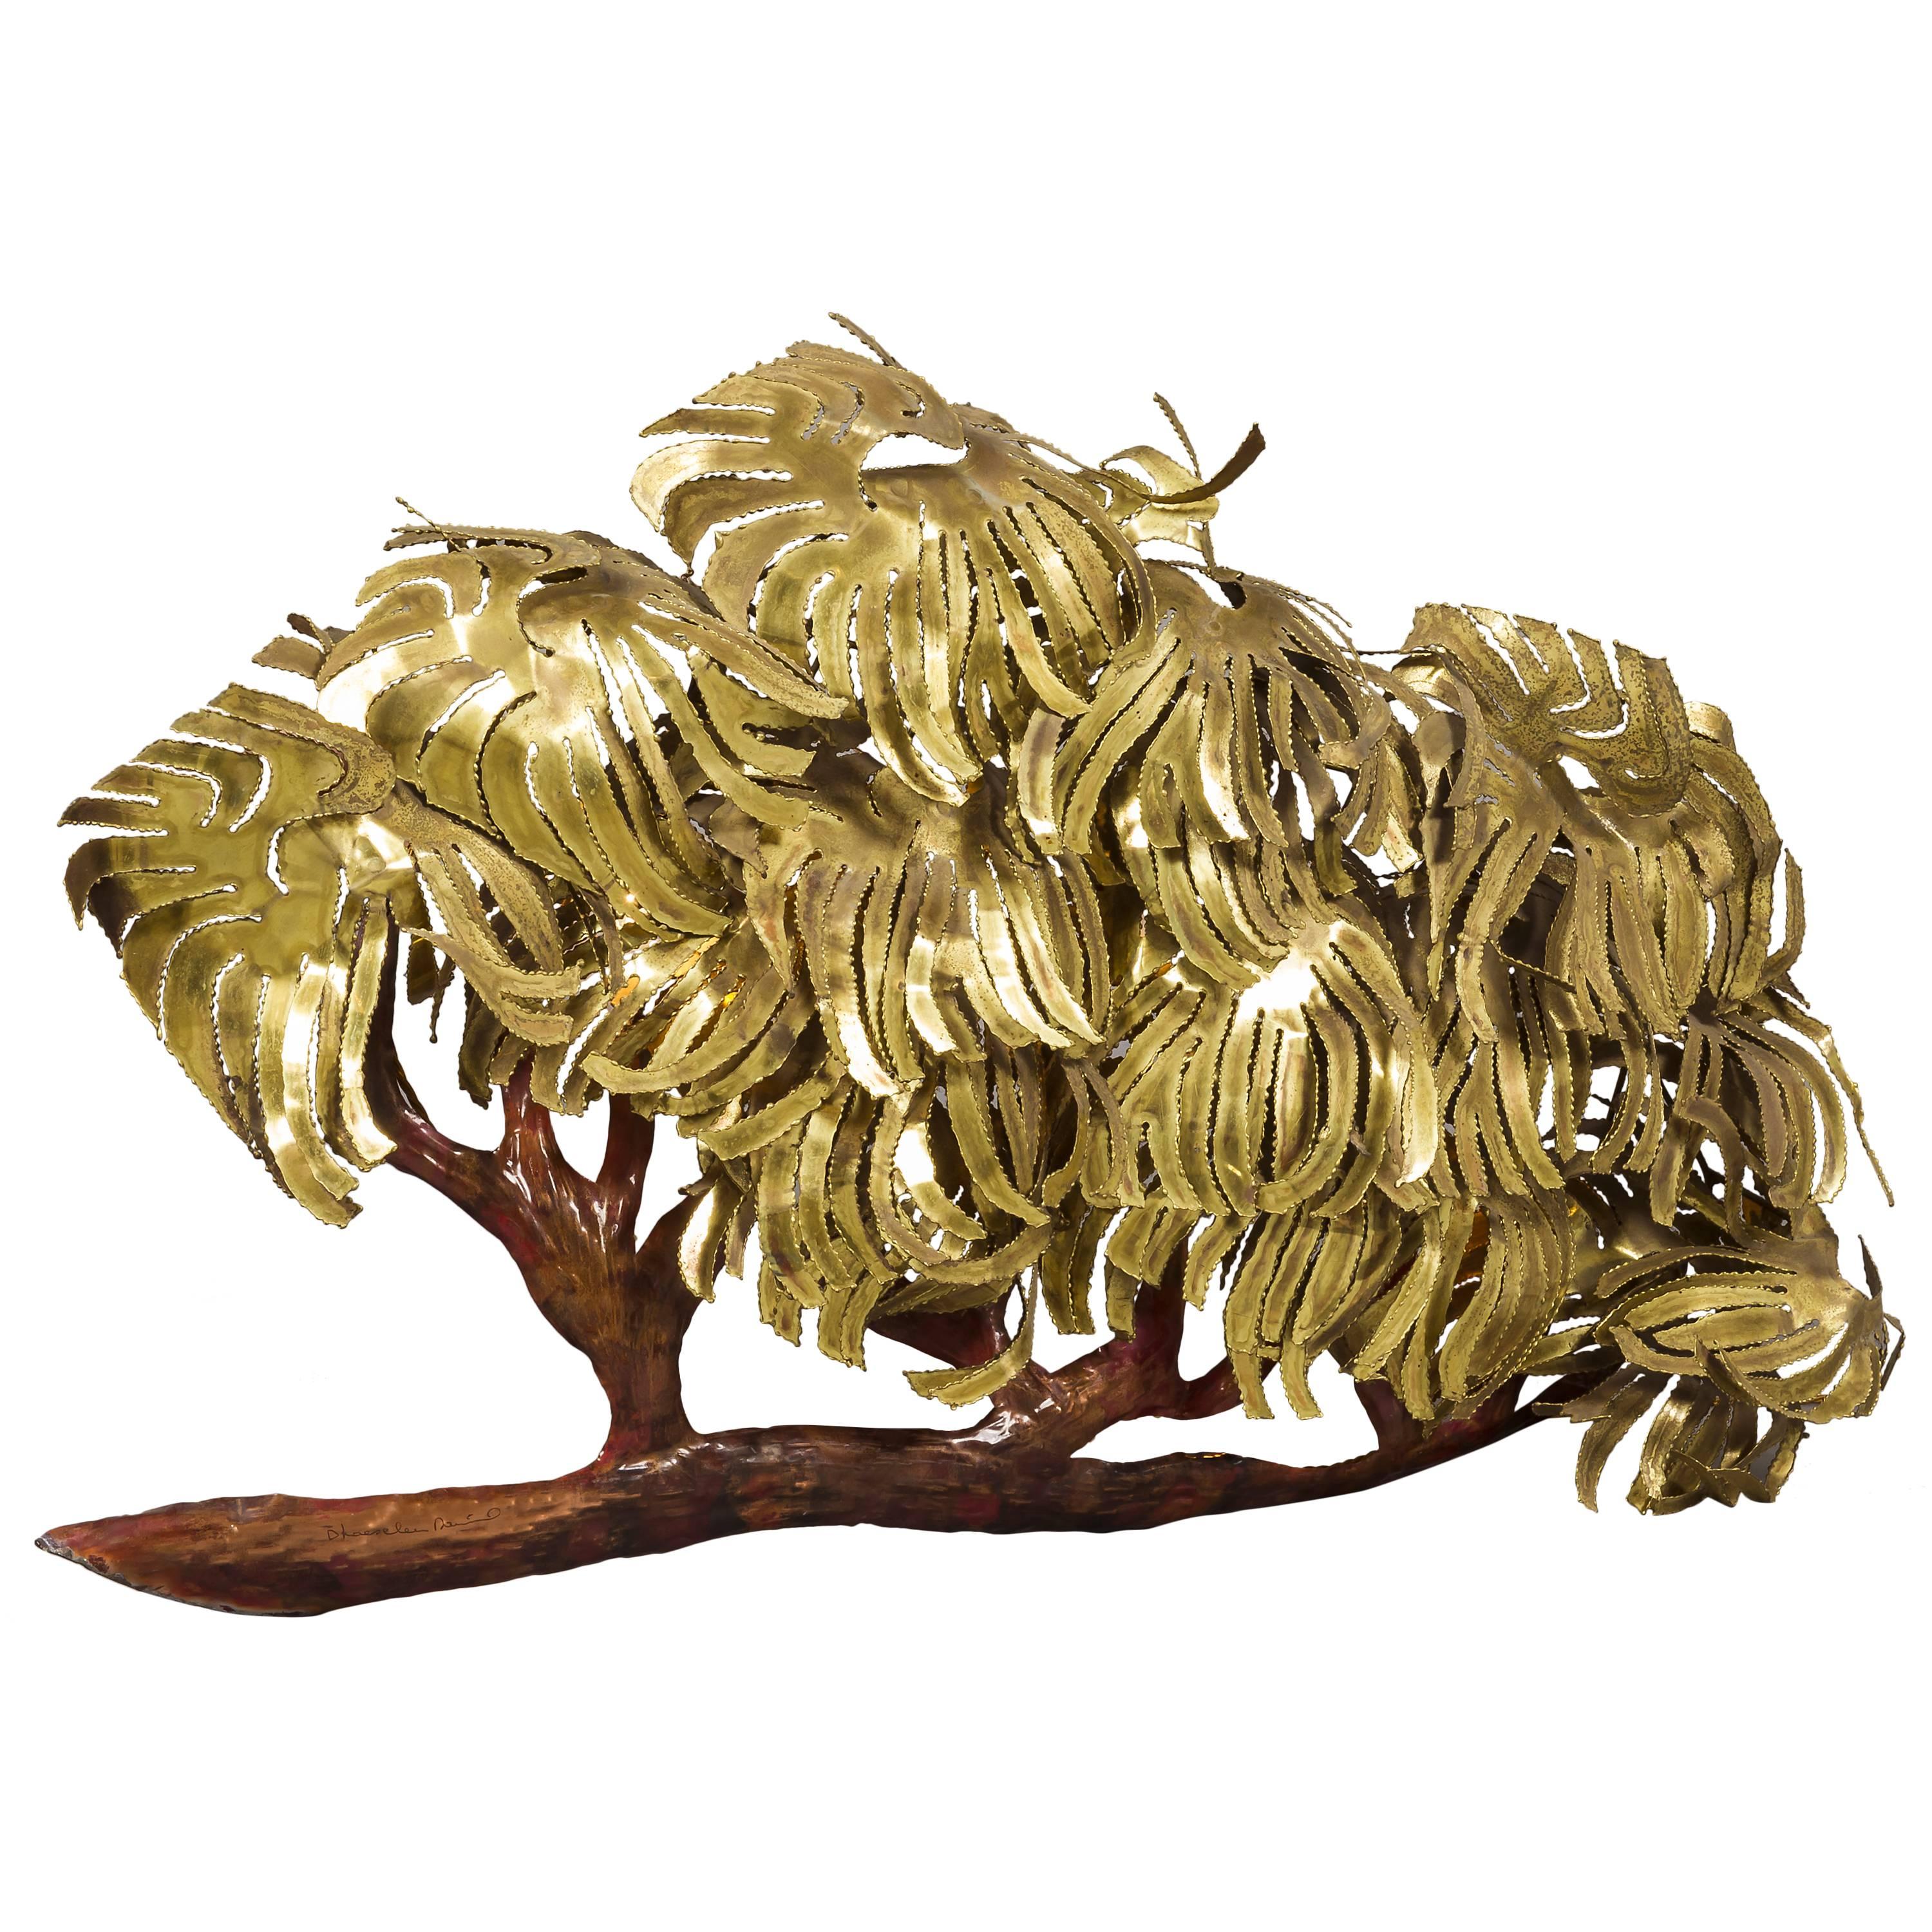 Large Illuminated Brass and Copper Tree Wall Sculpture by Daniel Dhaseleer